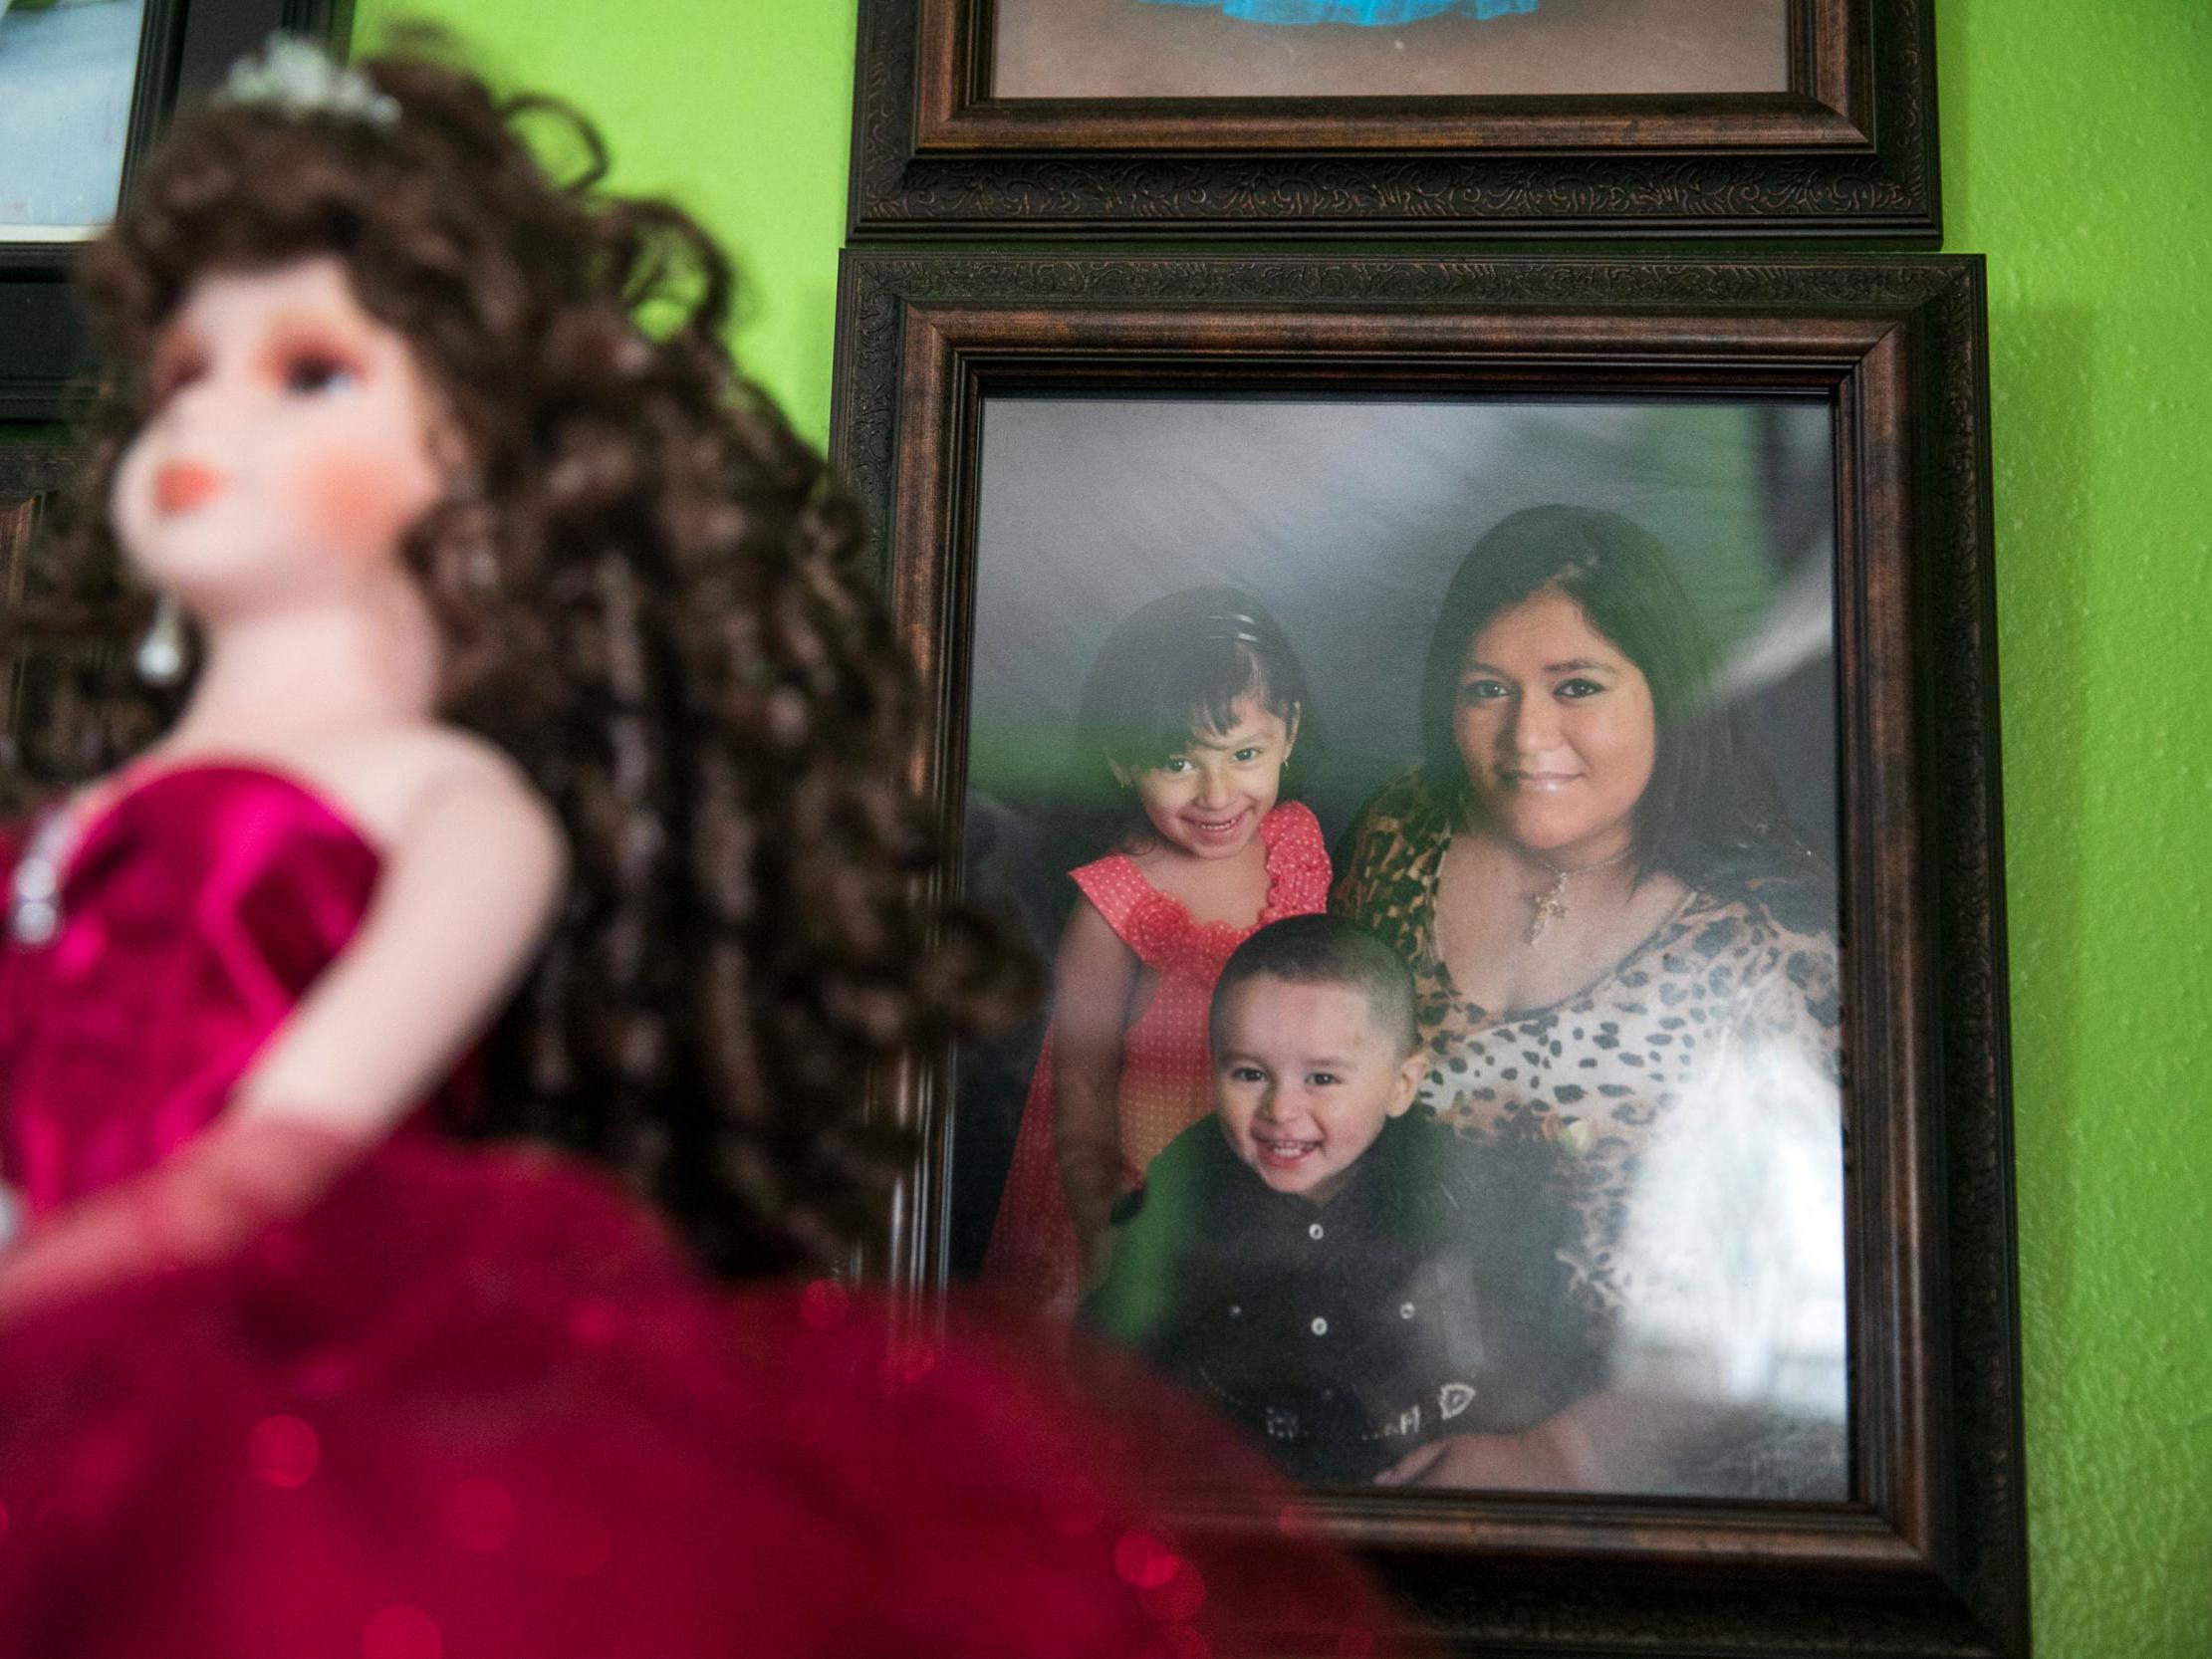 Minerva Cisneros was shot and killed by the father of her three children in Fort Worth, Texas